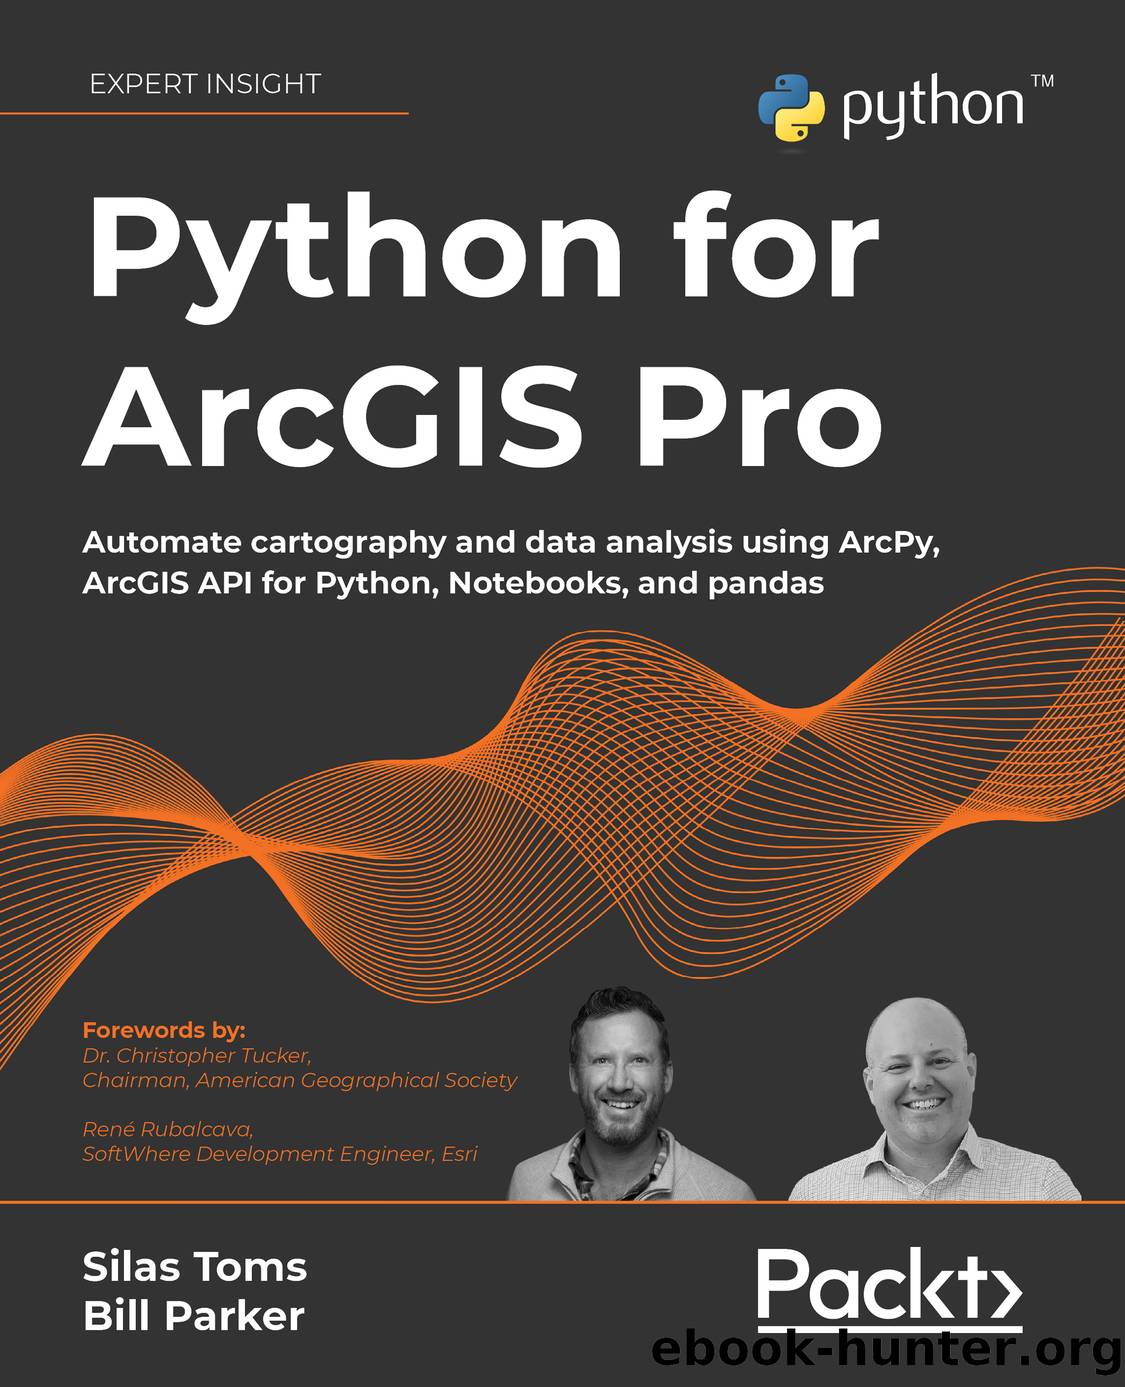 Python for ArcGIS Pro by Silas Toms Bill Parker